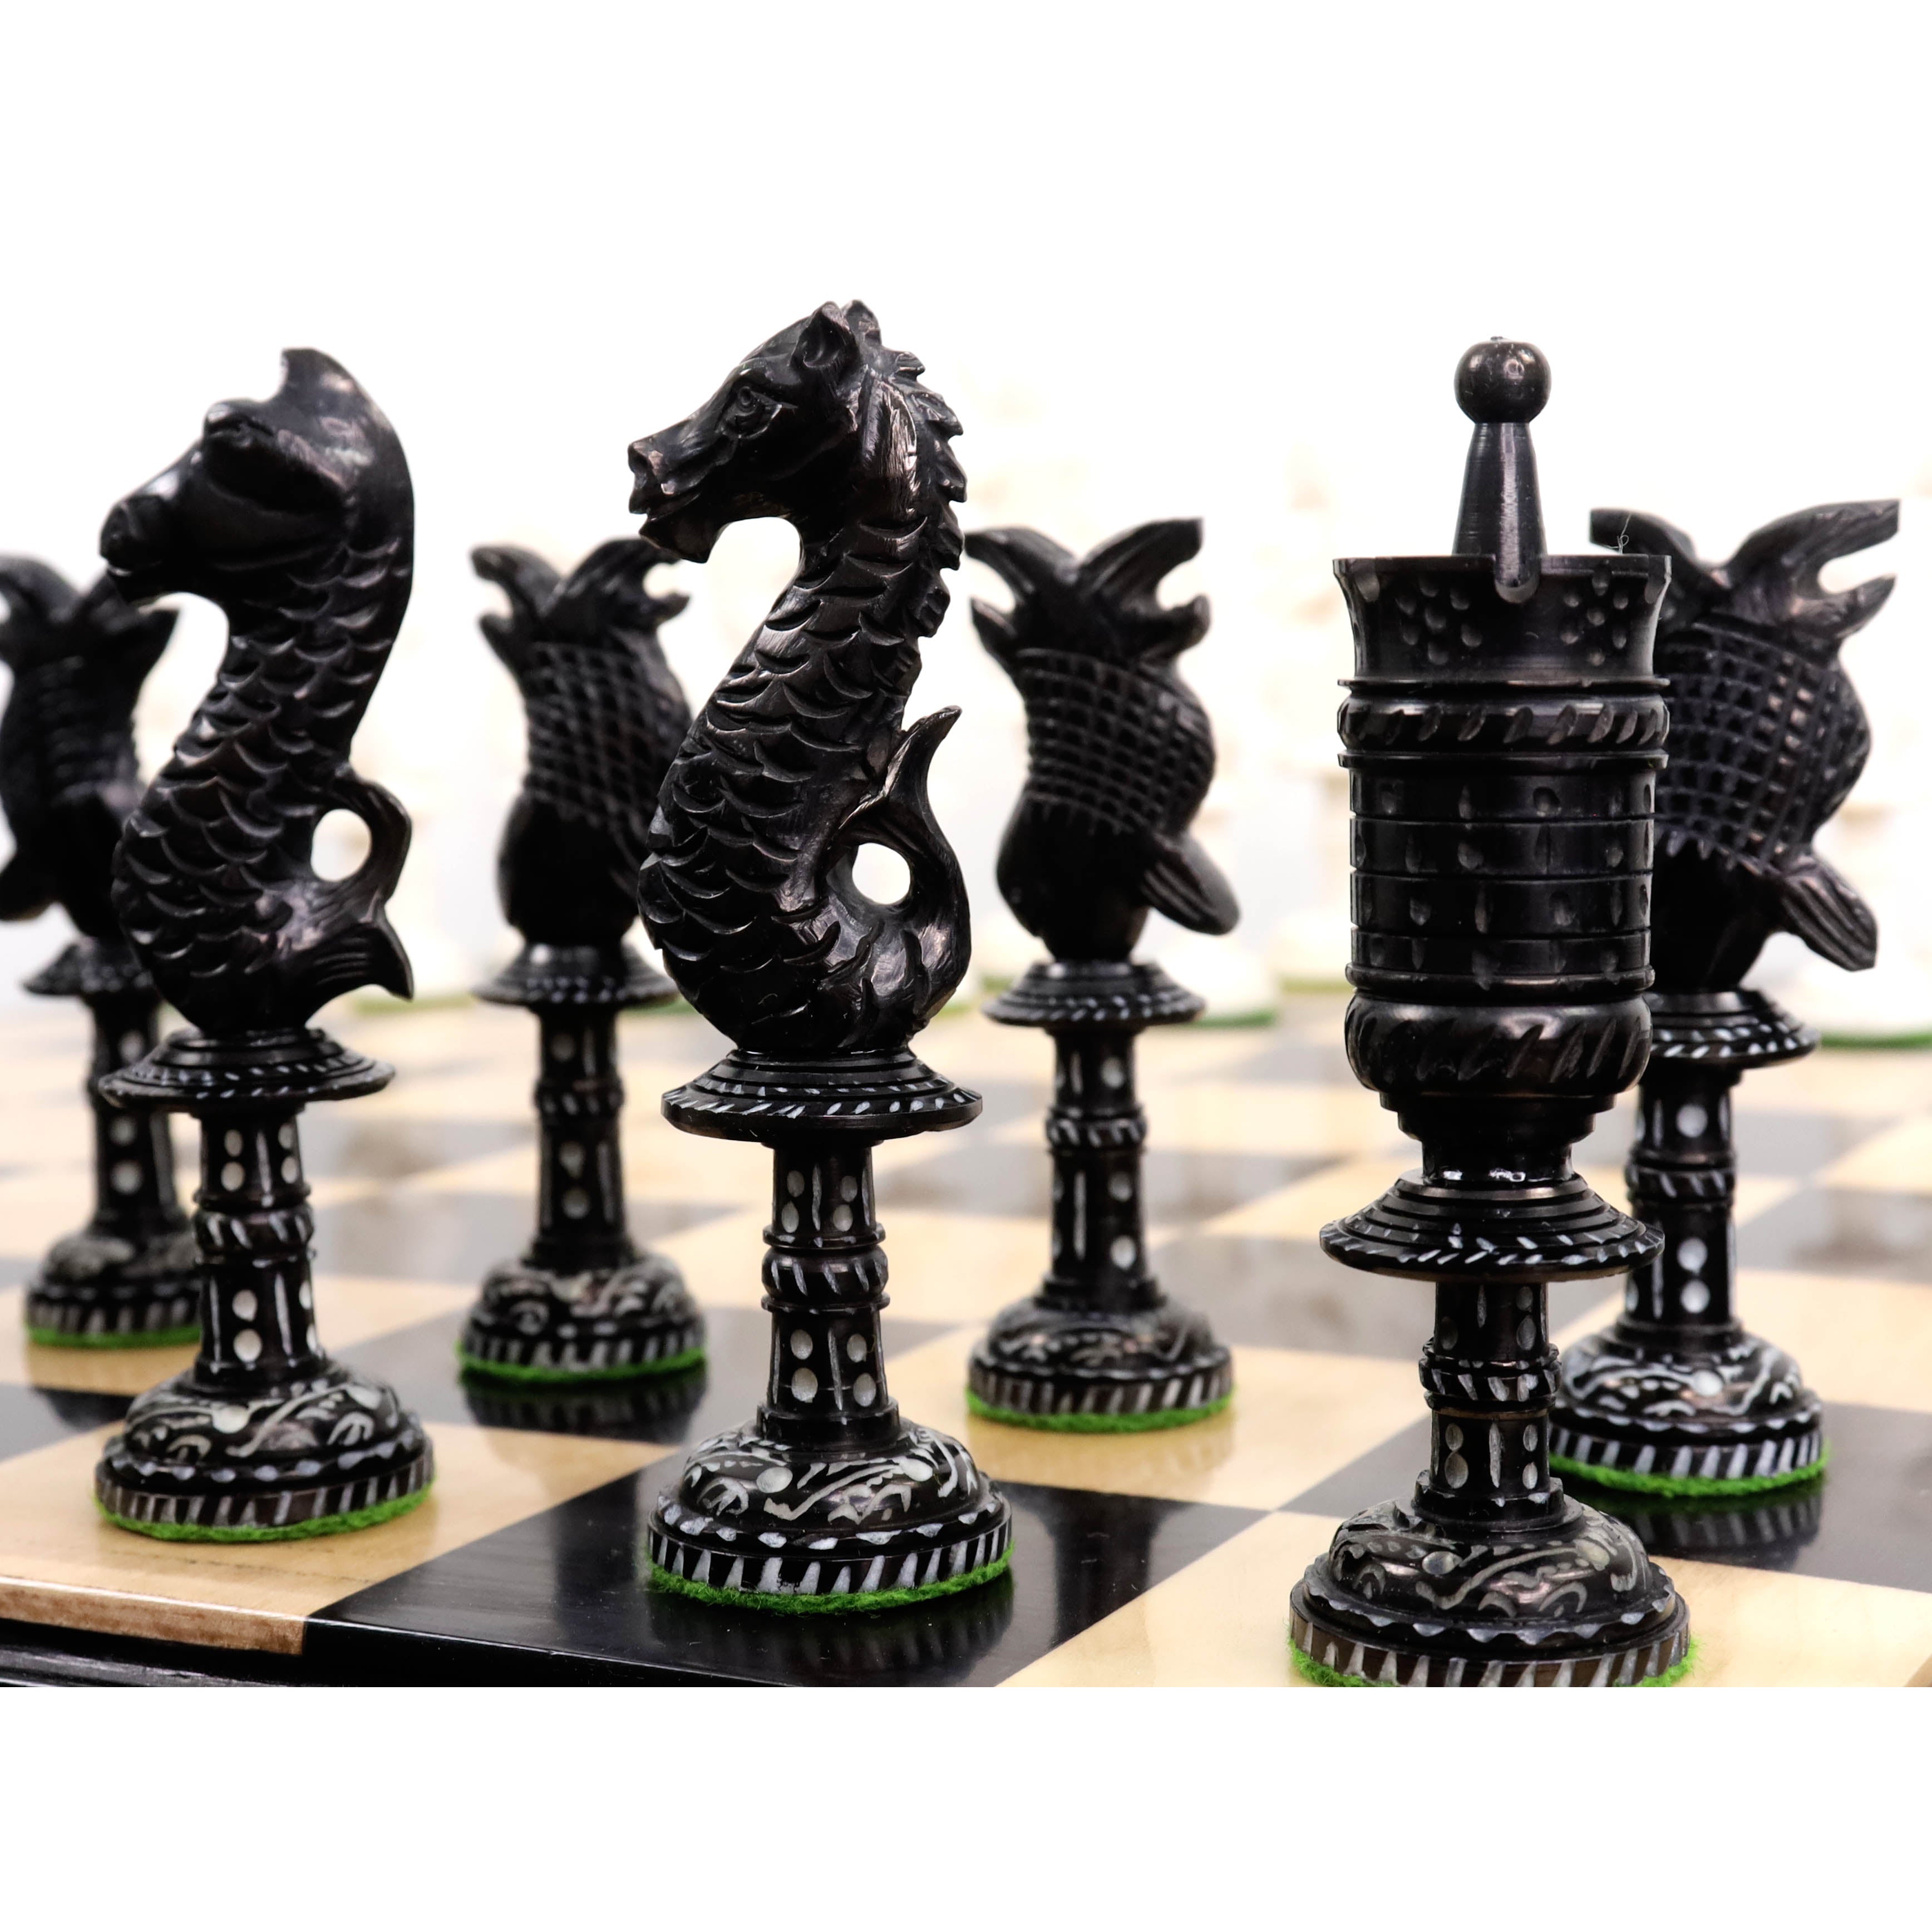 4.8" Water Kingdom Series Hand Carved Chess Pieces Only Set - Camel Bone